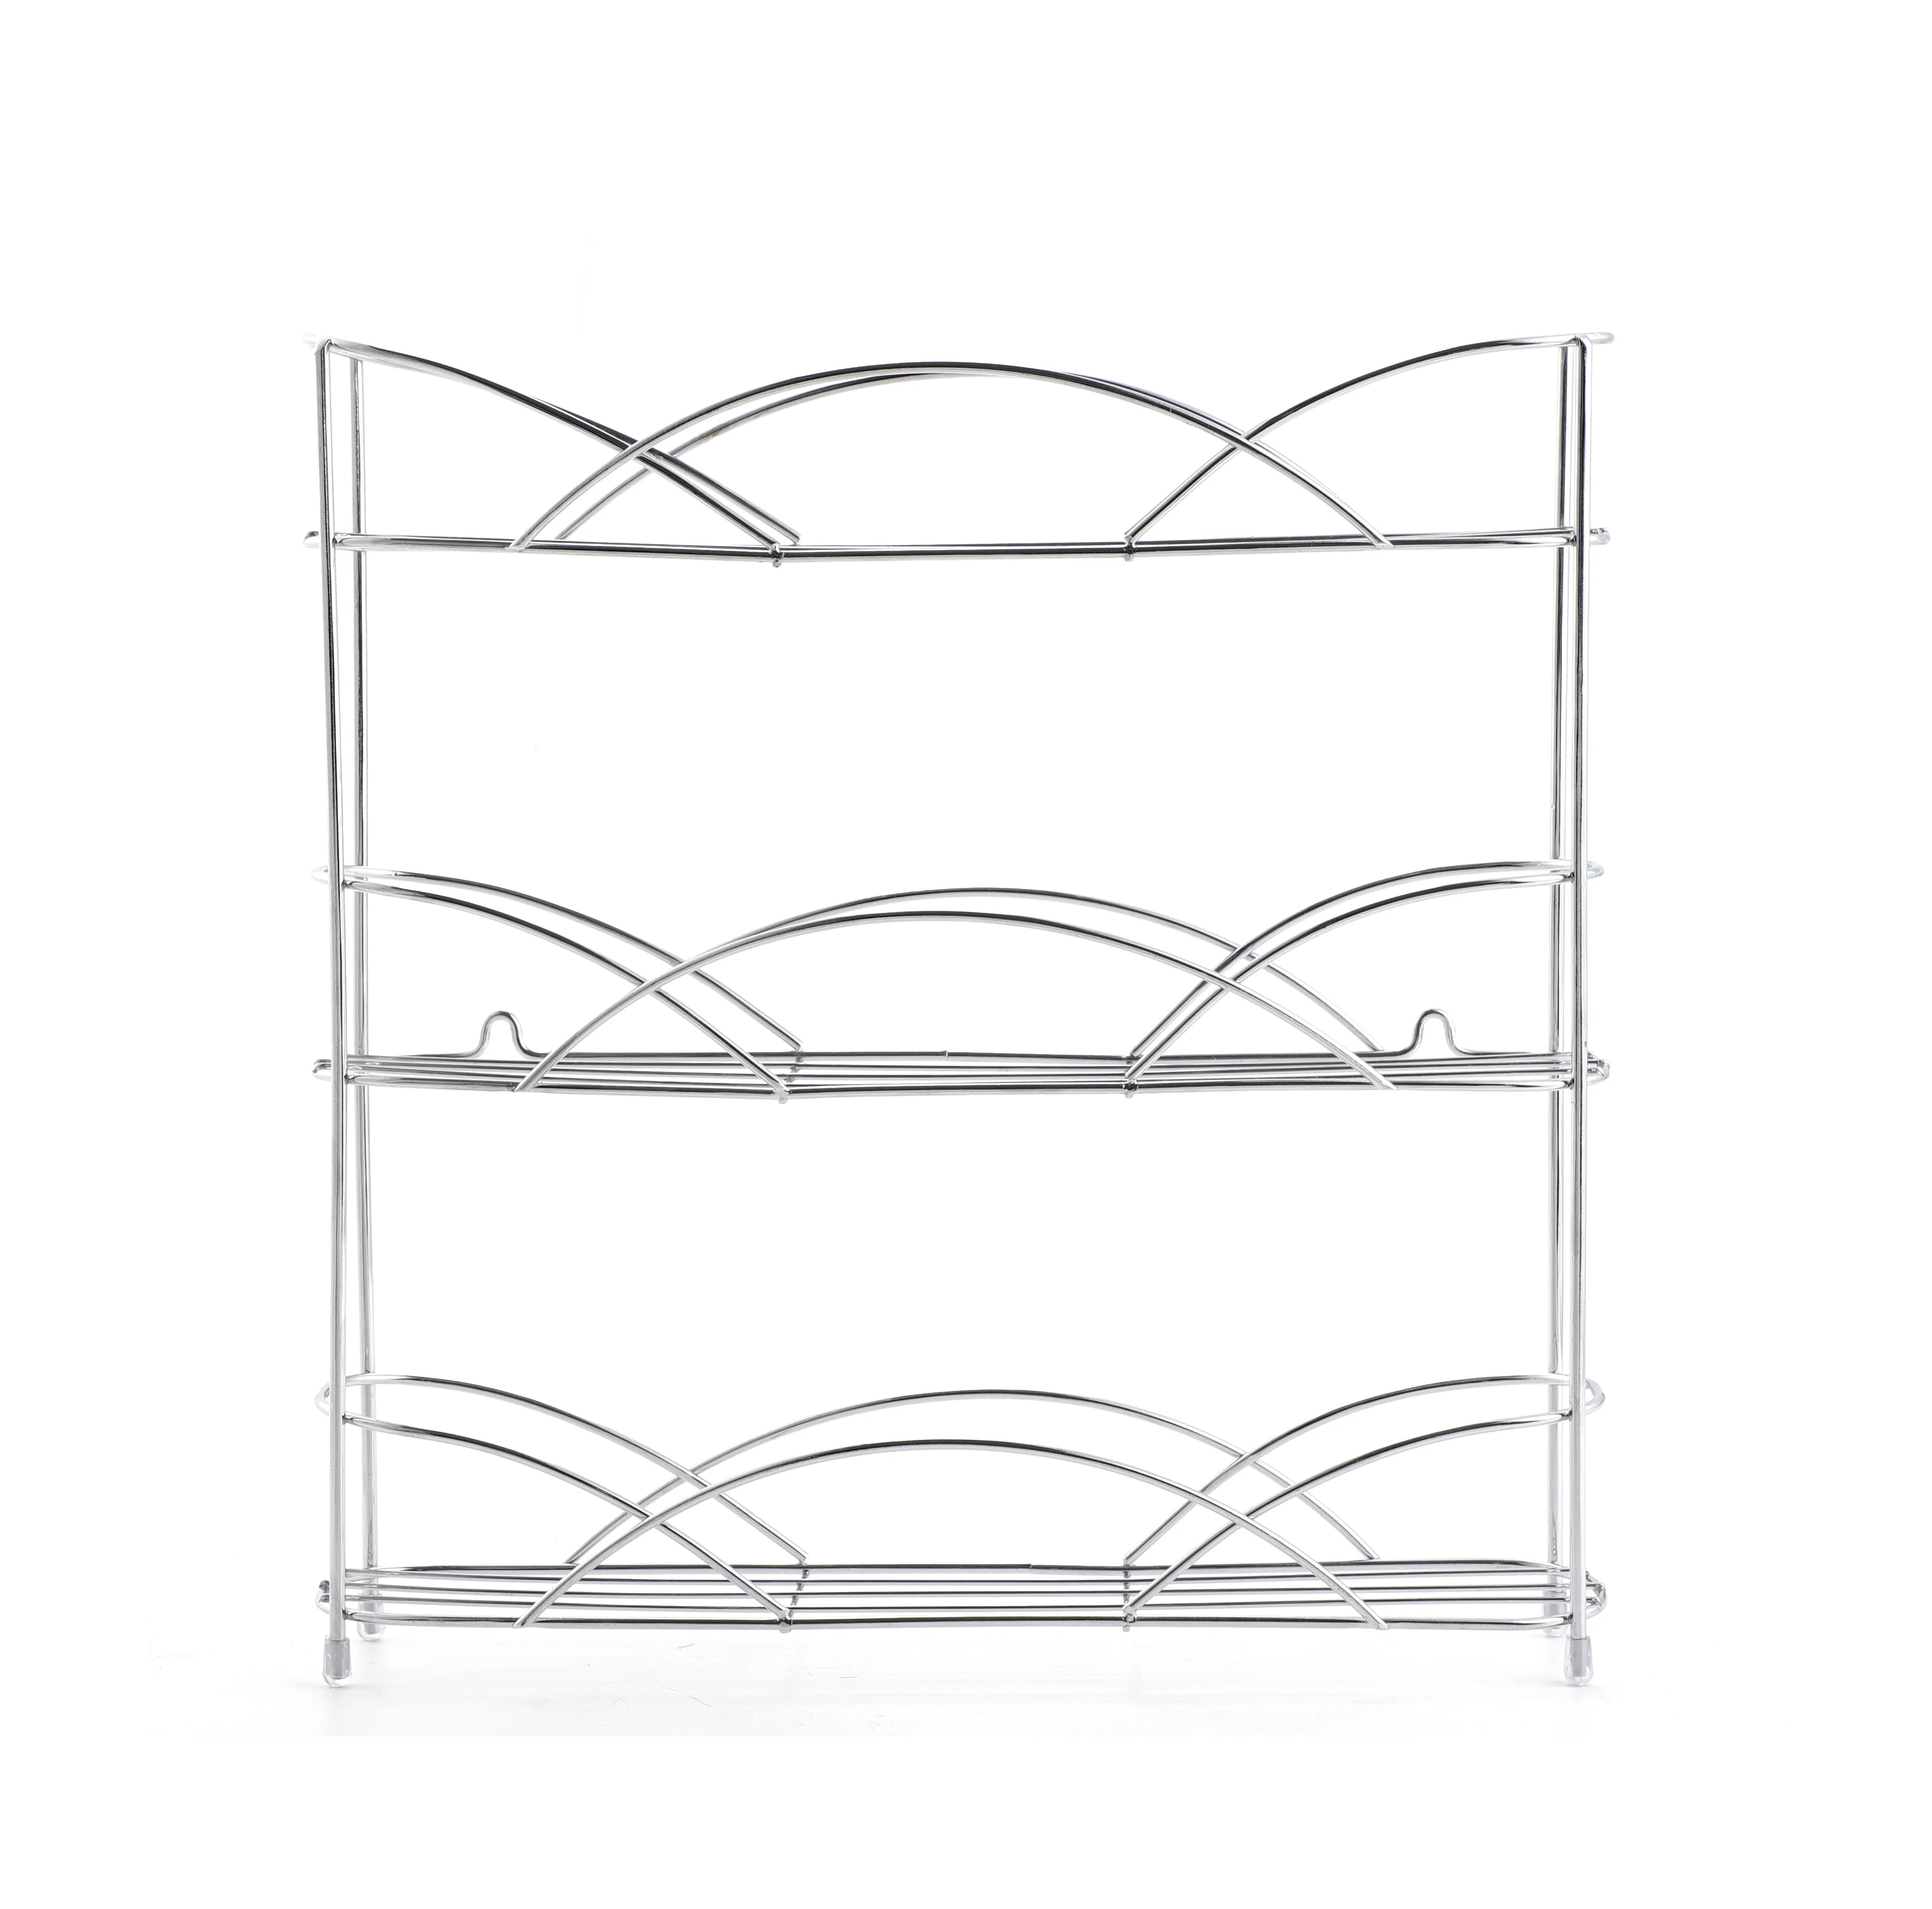 Chrome Spice Rack Organizer Chrome Countertop 3-Tier Rack Kitchen Cabinet Organizer Or Optional Wall-Mounted Storage 3 Spice Shelves